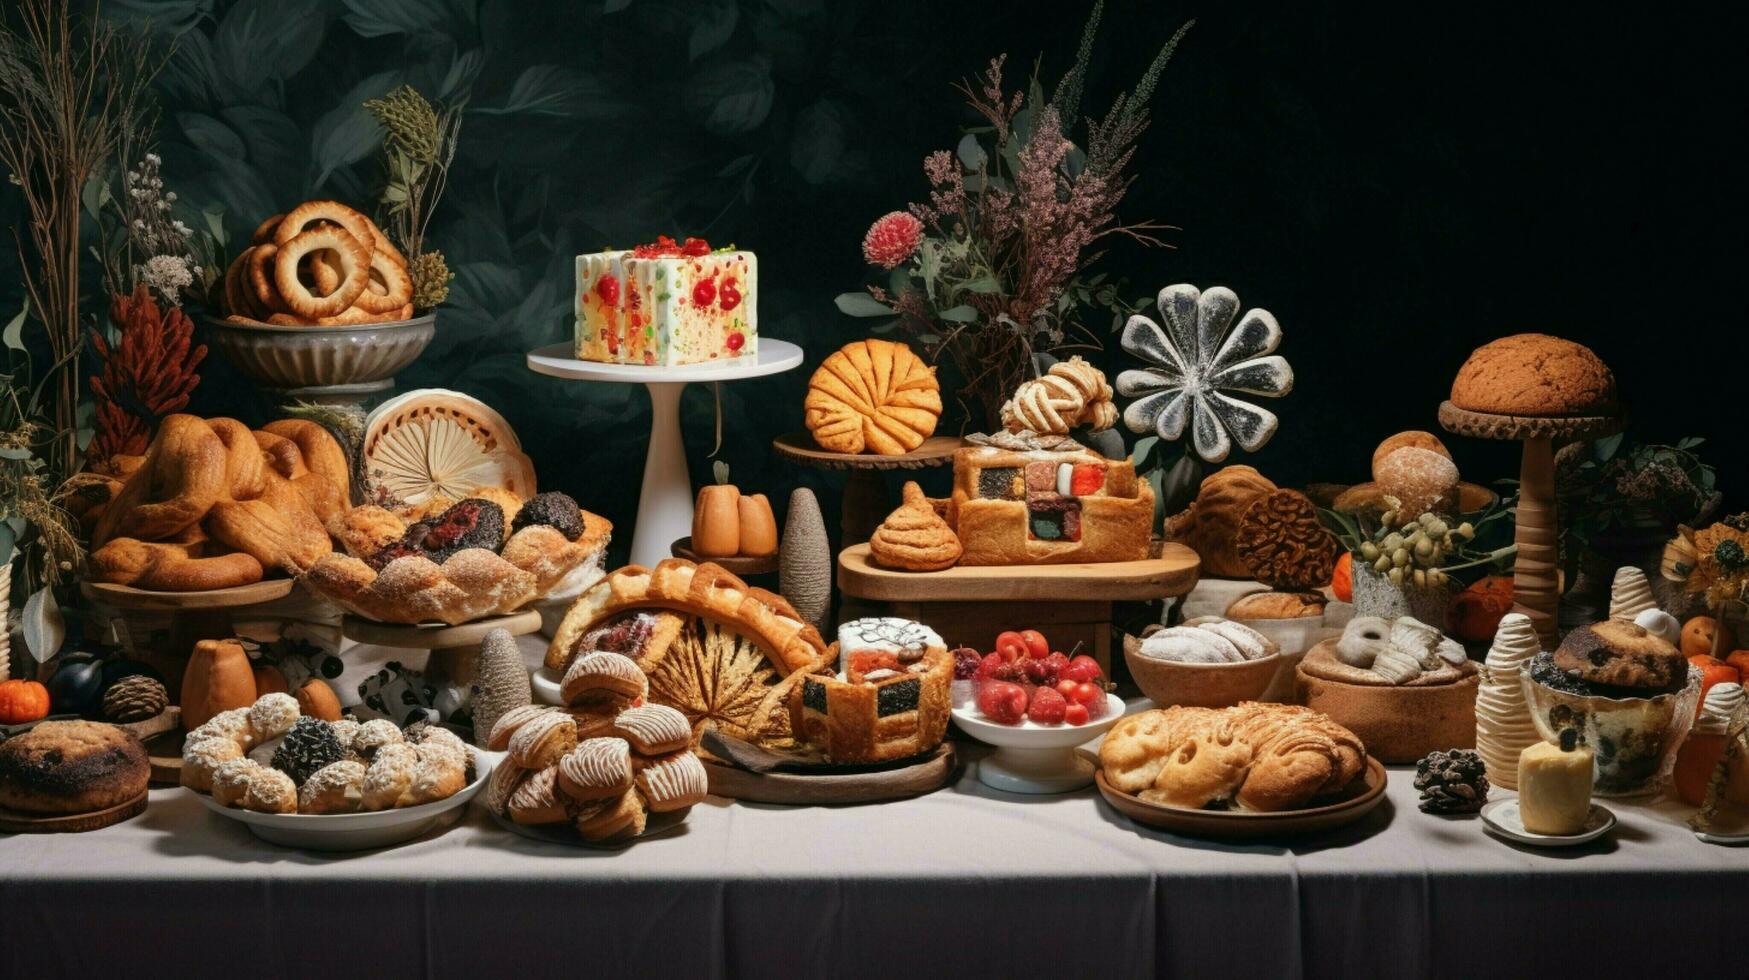 a festive table of baked goods in various shapes and color photo